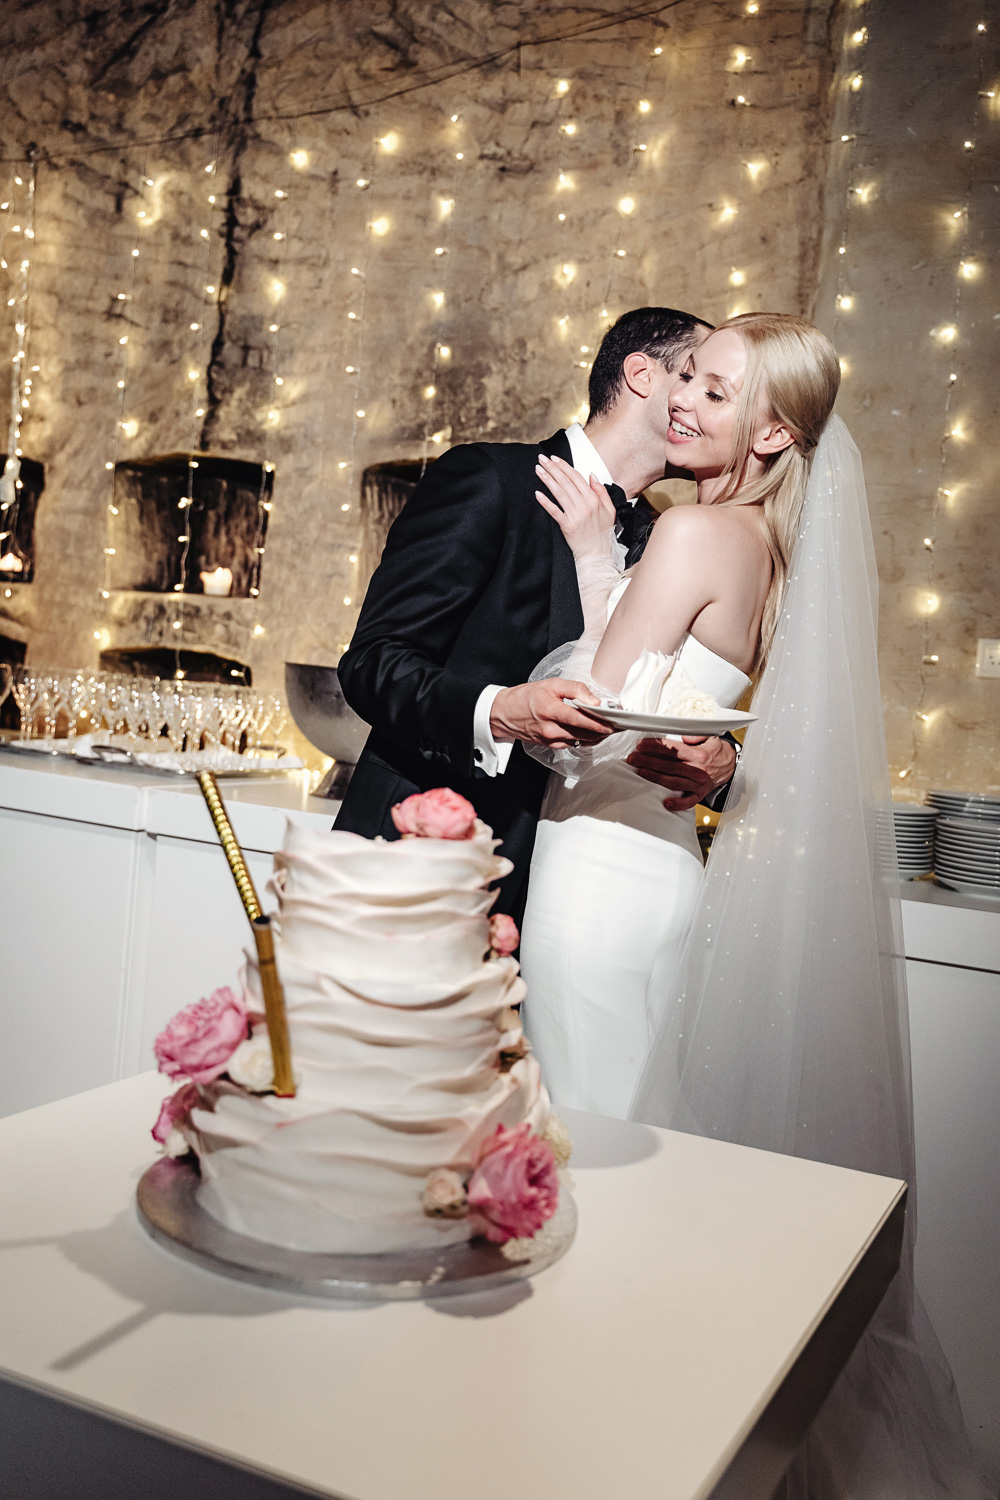 Bride and groom cut a wedding cake and after smiling and kissing